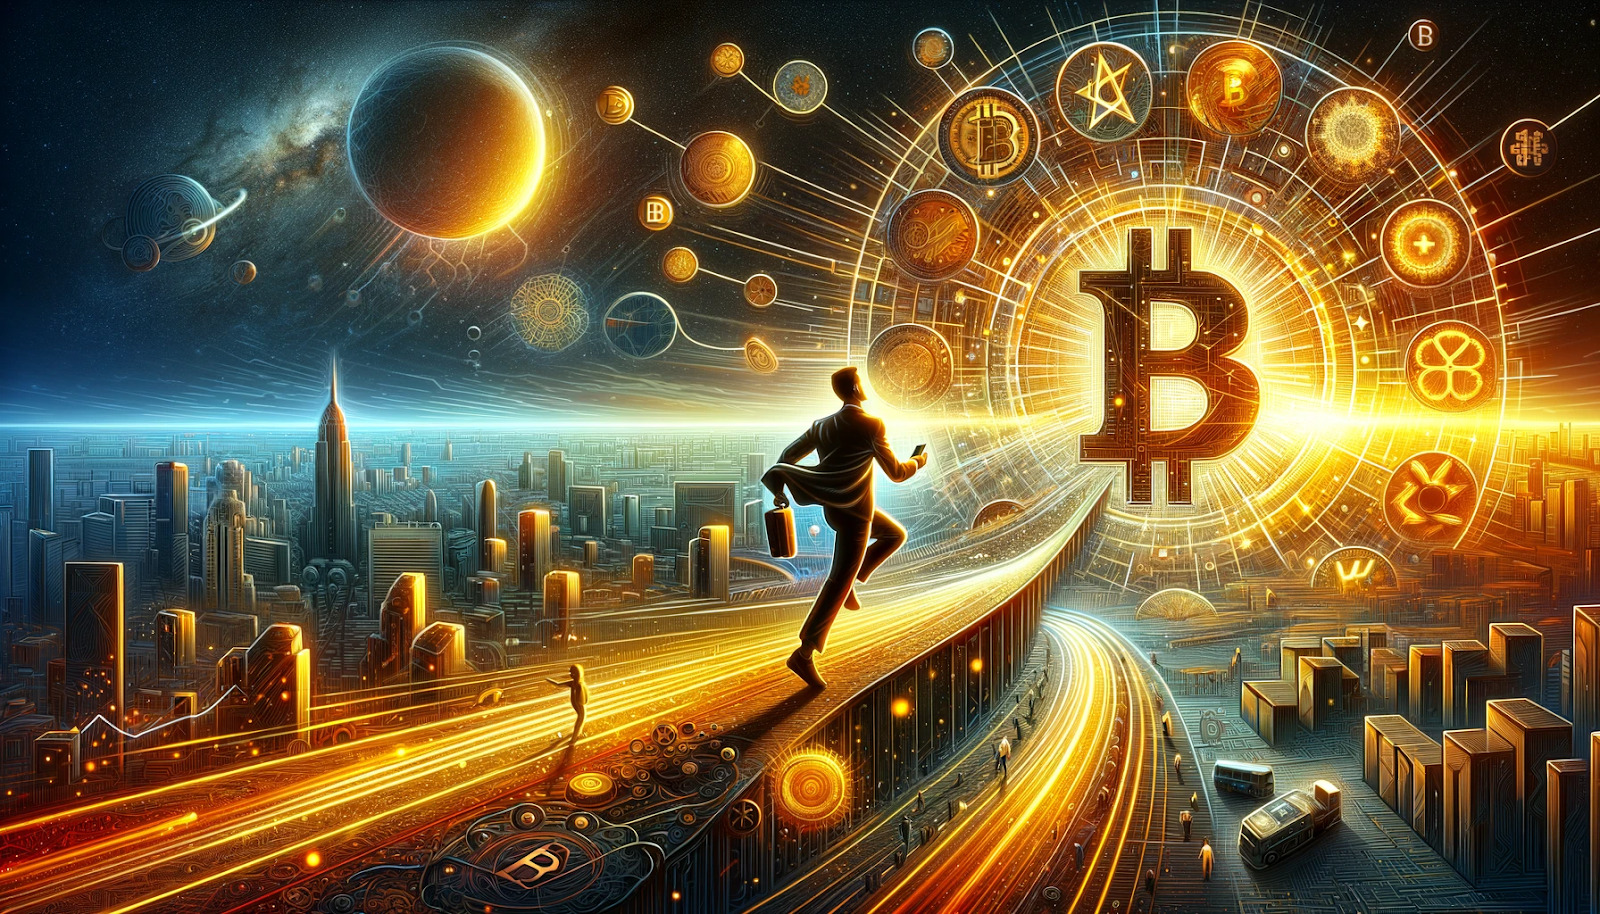 Bitcoin Revolution: How The Digital Gold Era Is Turning The Financial World Upside Down – A Comprehensive Analysis